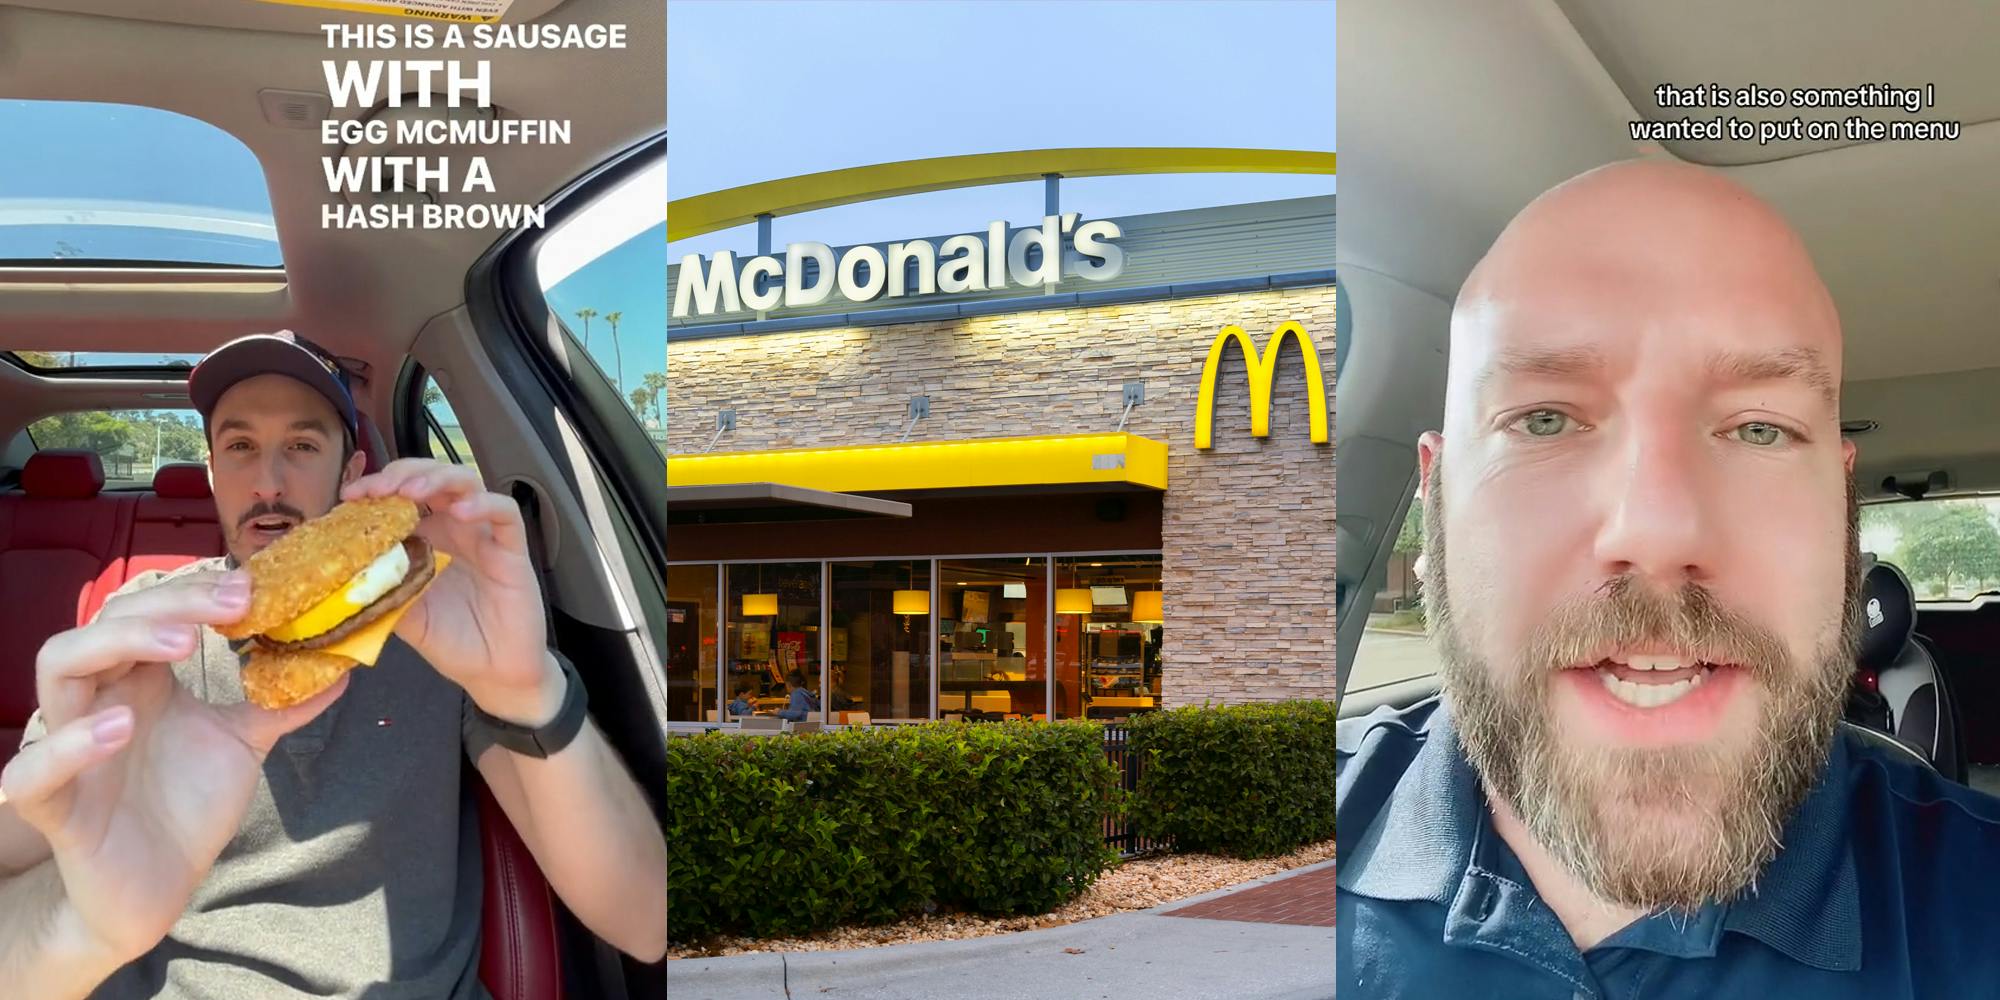 McDonald's customer speaking in car holding sausage egg mcmuffin with hash brown with caption "THIS IS A SAUSAGE WITH EGG MCMUFFIN WITH A HASH BROWN" (l) McDonald's building with signs (c) former McDonald's corporate chef speaking in car with caption "that is also something I wanted to put on the menu" (r)